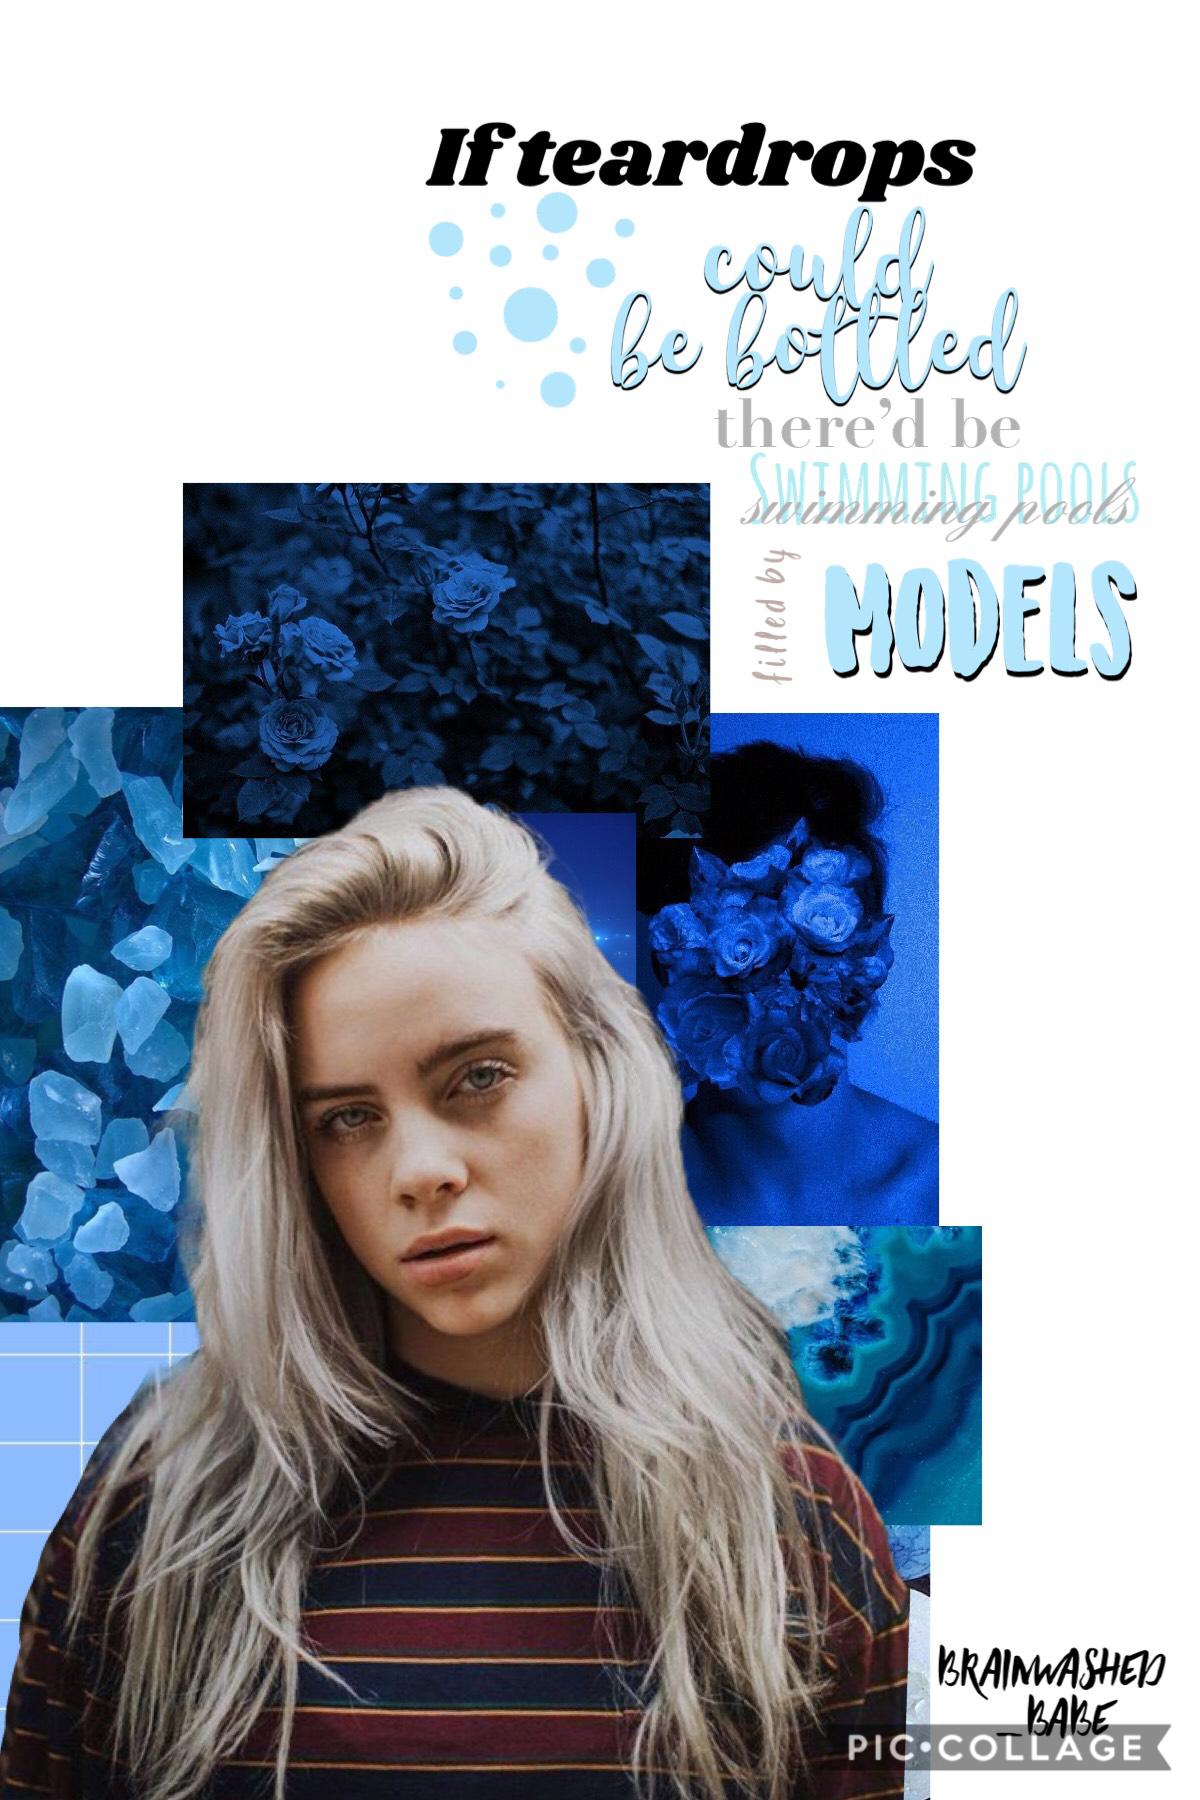 I’ve been away for a while haha! So hi again guys! I am loving Billie Eilish right now!What do you guys think of her??